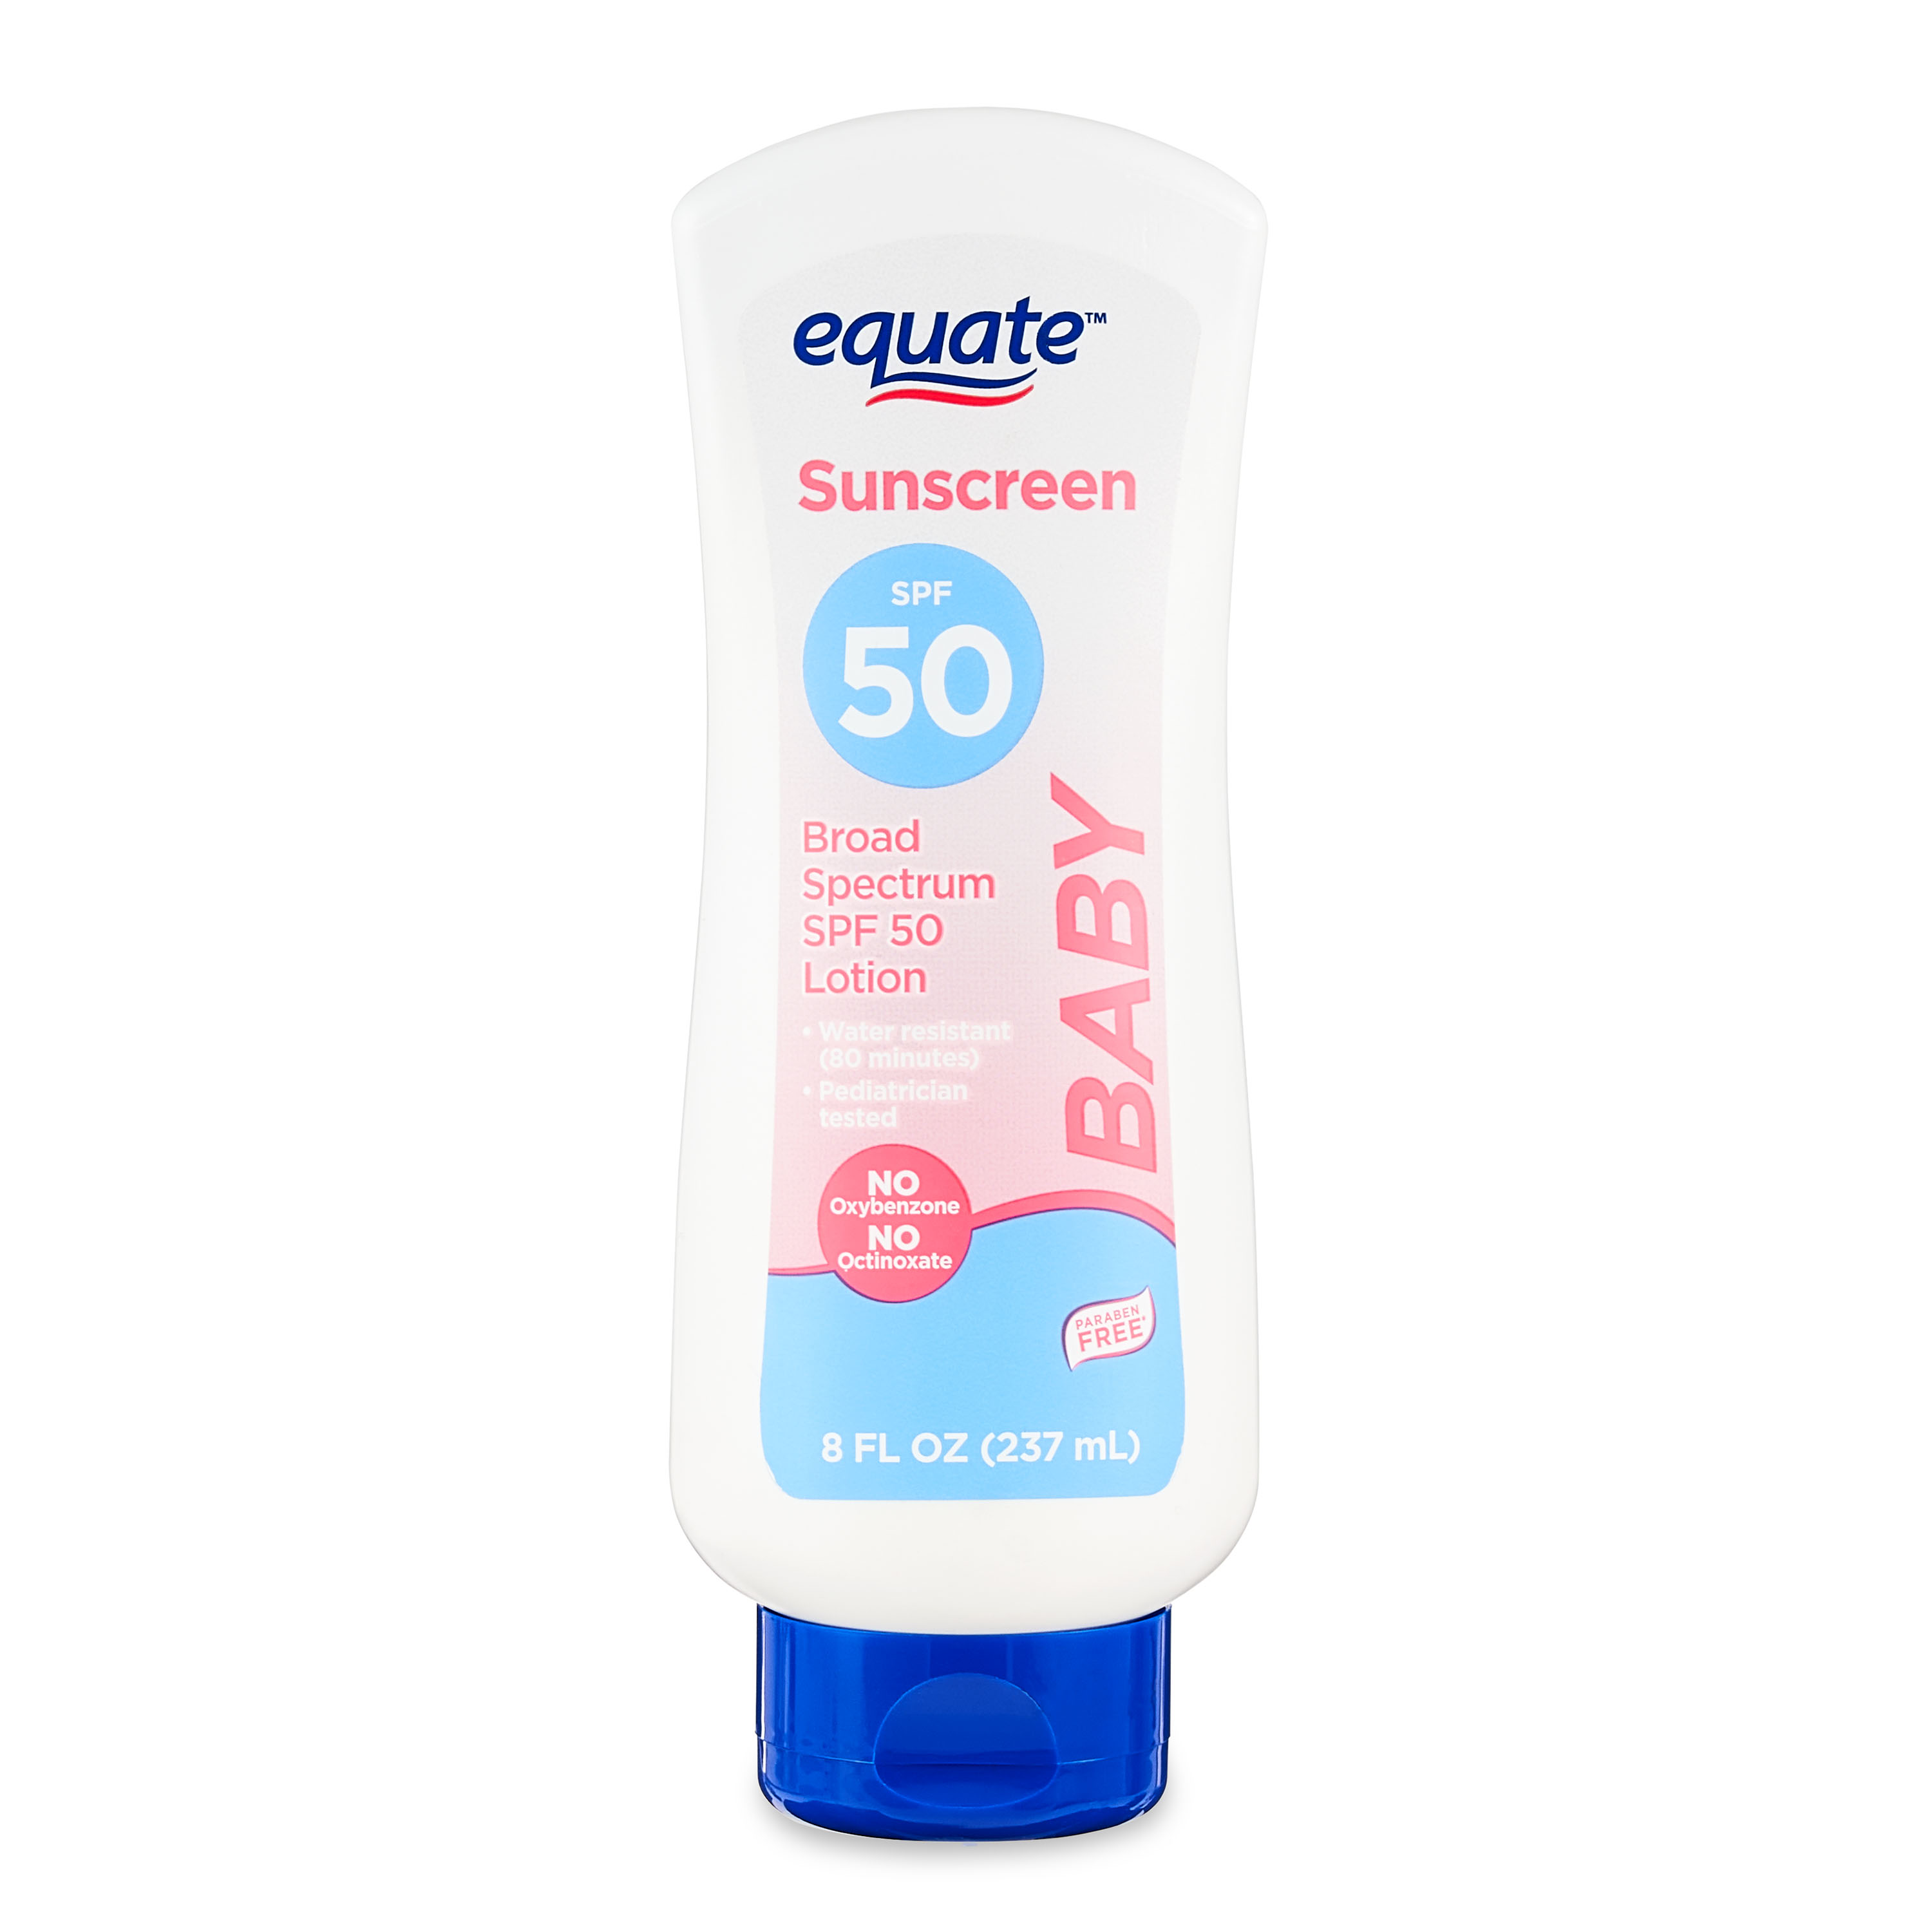 Equate Baby Broad Spectrum Sunscreen Lotion, SPF 50, 8 fl oz - image 1 of 8